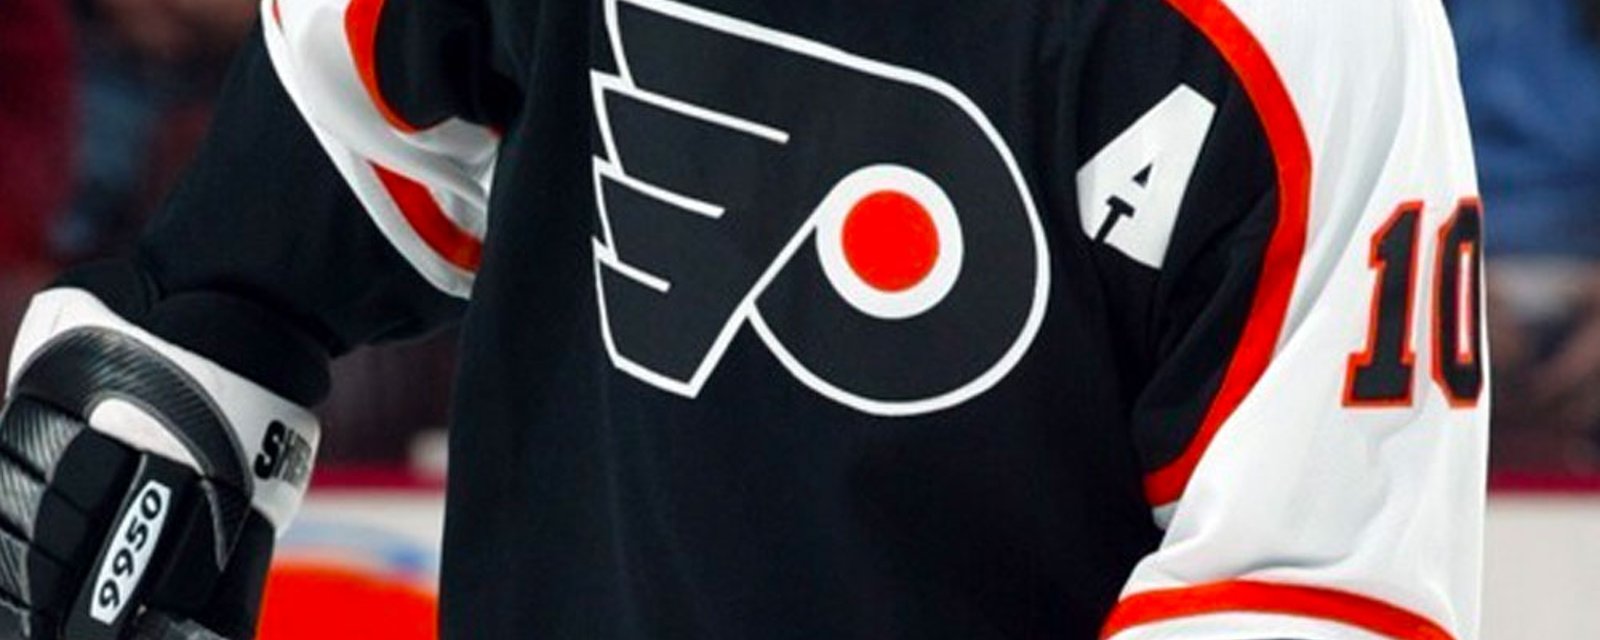 Briere hires yet another former Flyer to join front office staff